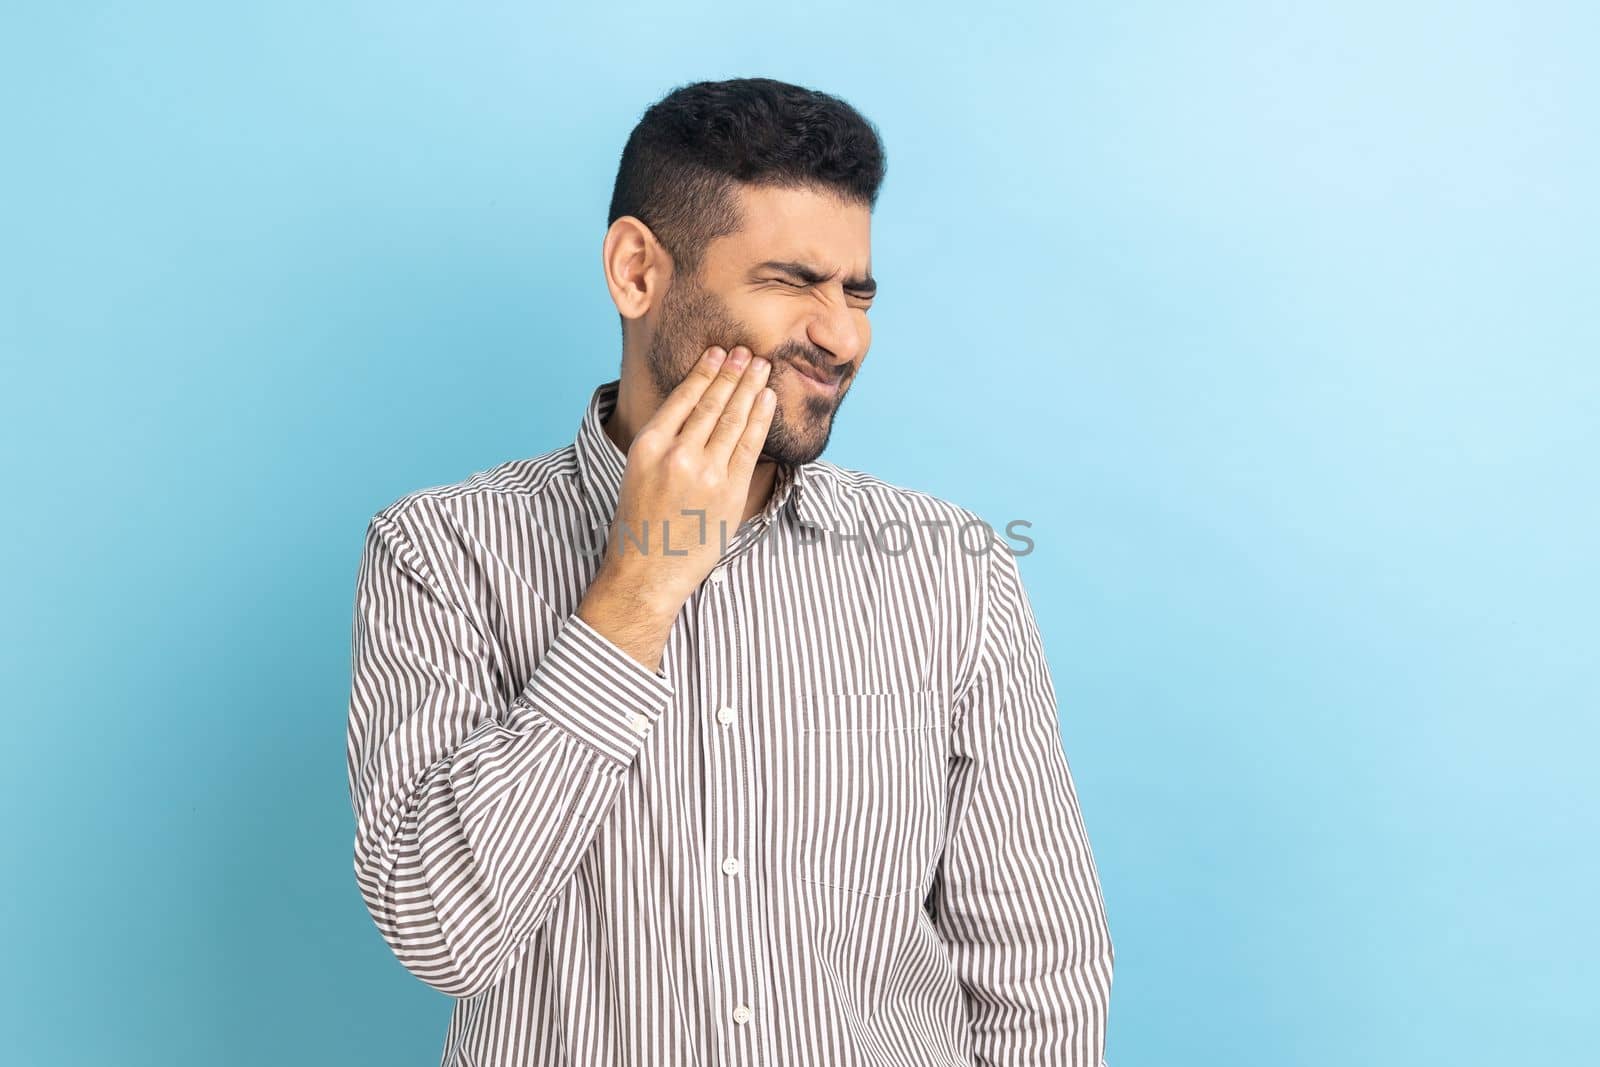 Unhappy bearded businessman feeling toothache, touching sore cheek, suffering from cavities, cracked teeth, gum recession, wearing striped shirt. Indoor studio shot isolated on blue background.